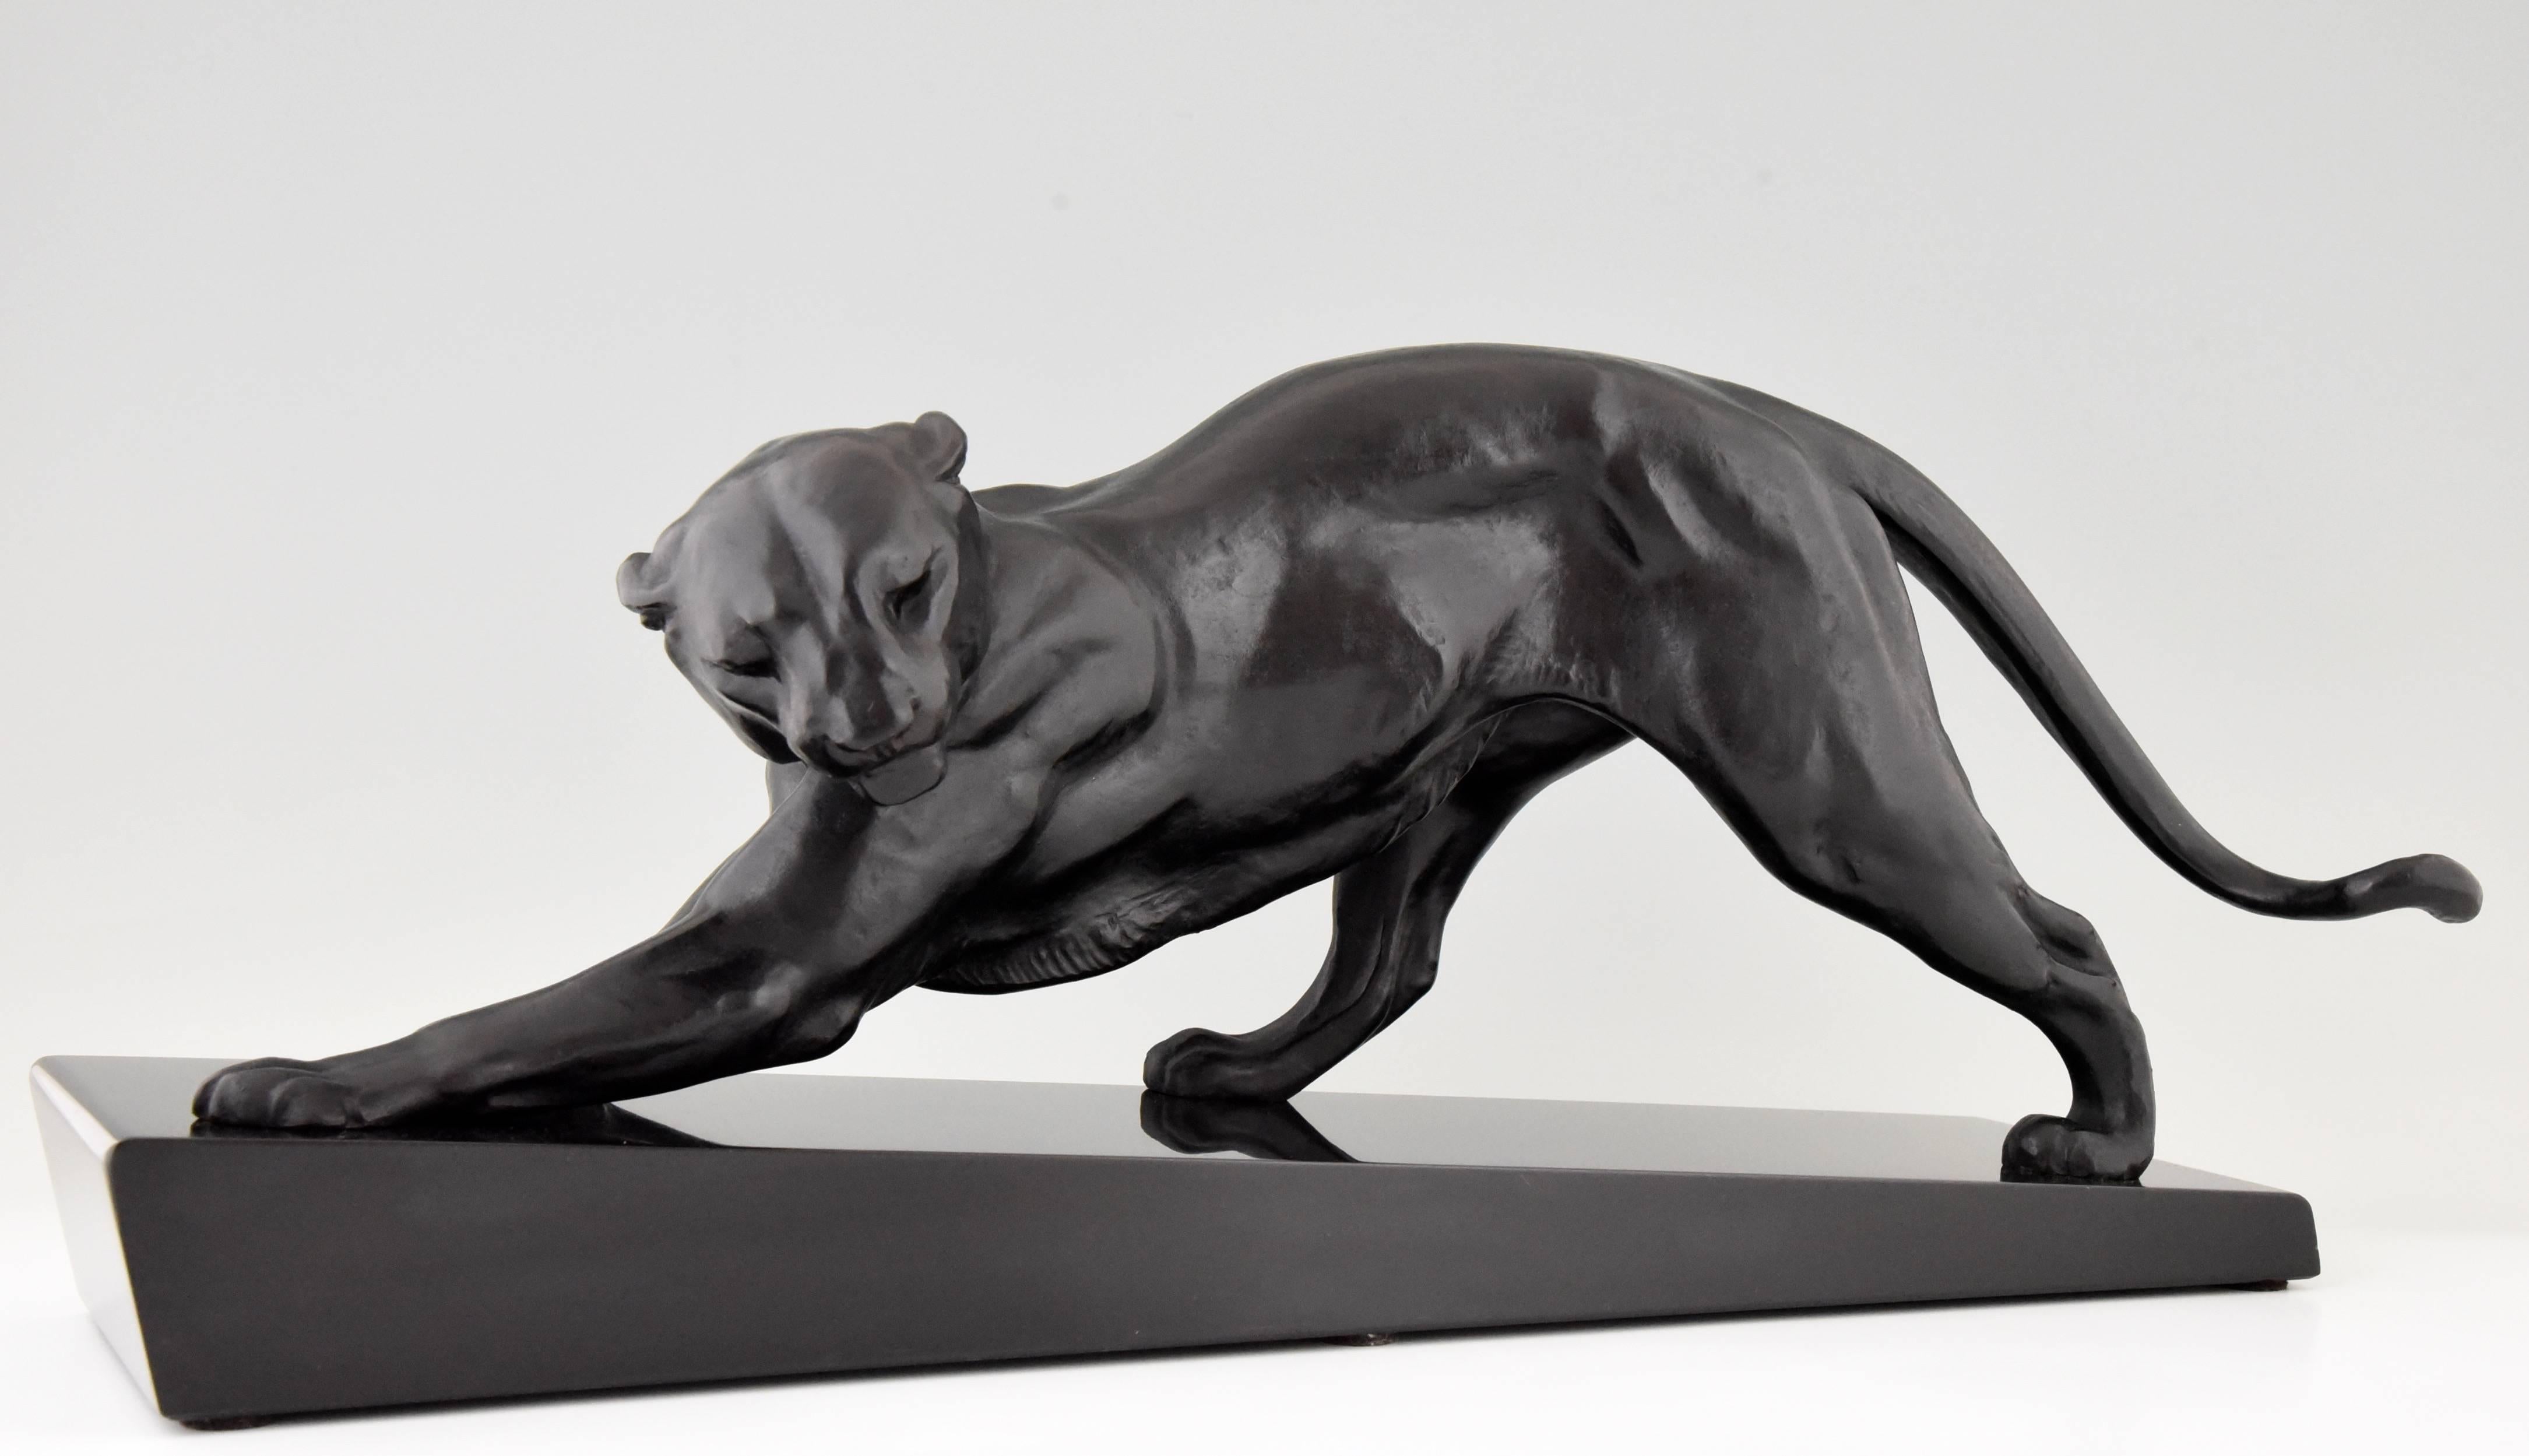 Art Deco panther on black marble base. 

Artist or maker: Plagnet.
Signature or marks: Plagnet.
Style: Art Deco.
Date: 1930.
Material: Patinated metal on marble base.
Origin: France.
Size: L 67.5 cm. x H 31 cm x W 21 cm.  
L 26.6 inch X H